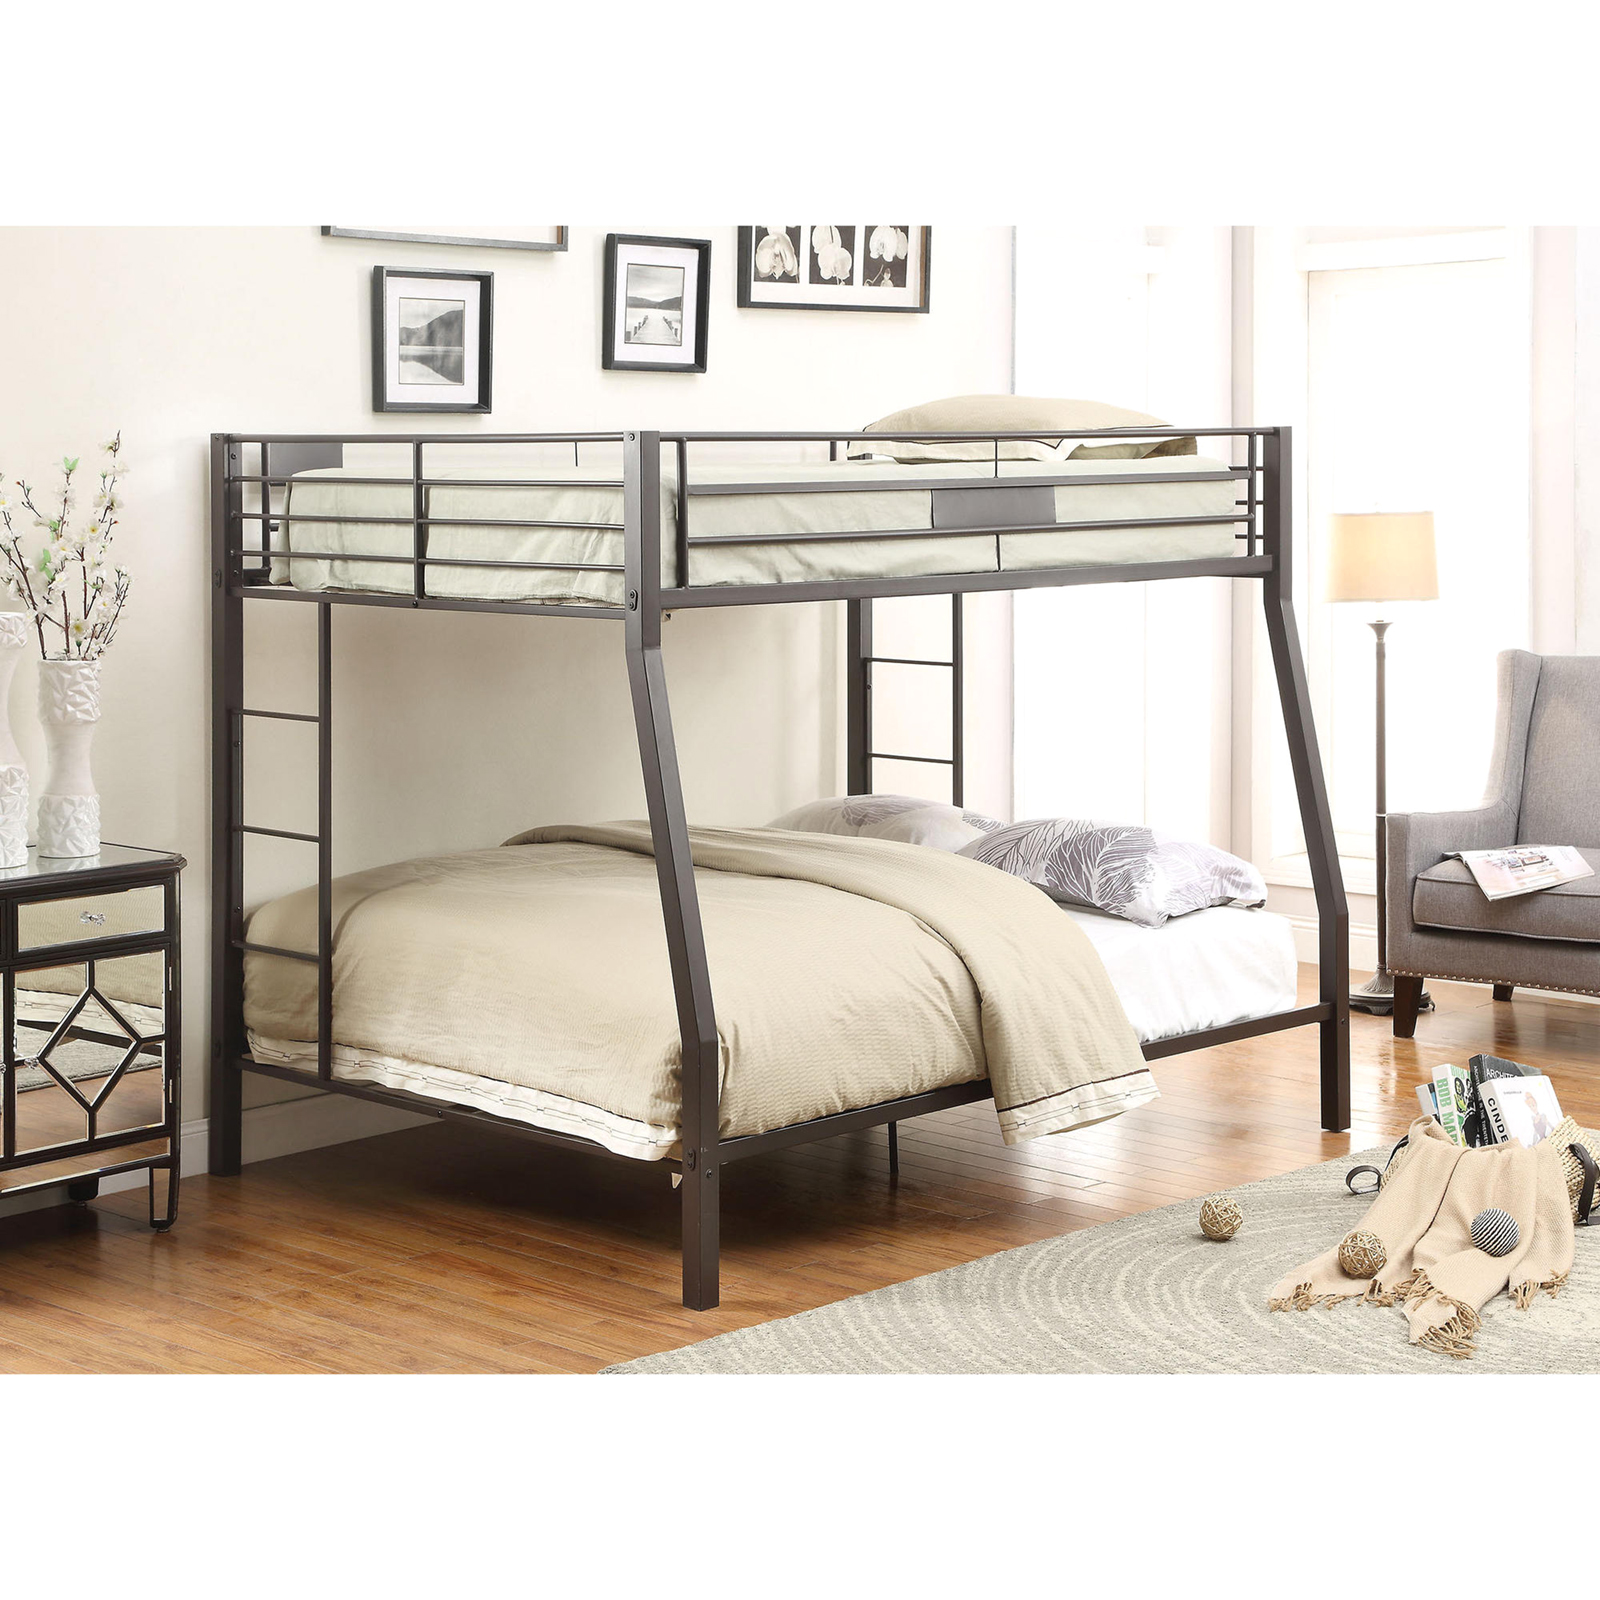 Acme Furniture Limbra Full Over Queen, Sears Bunk Beds